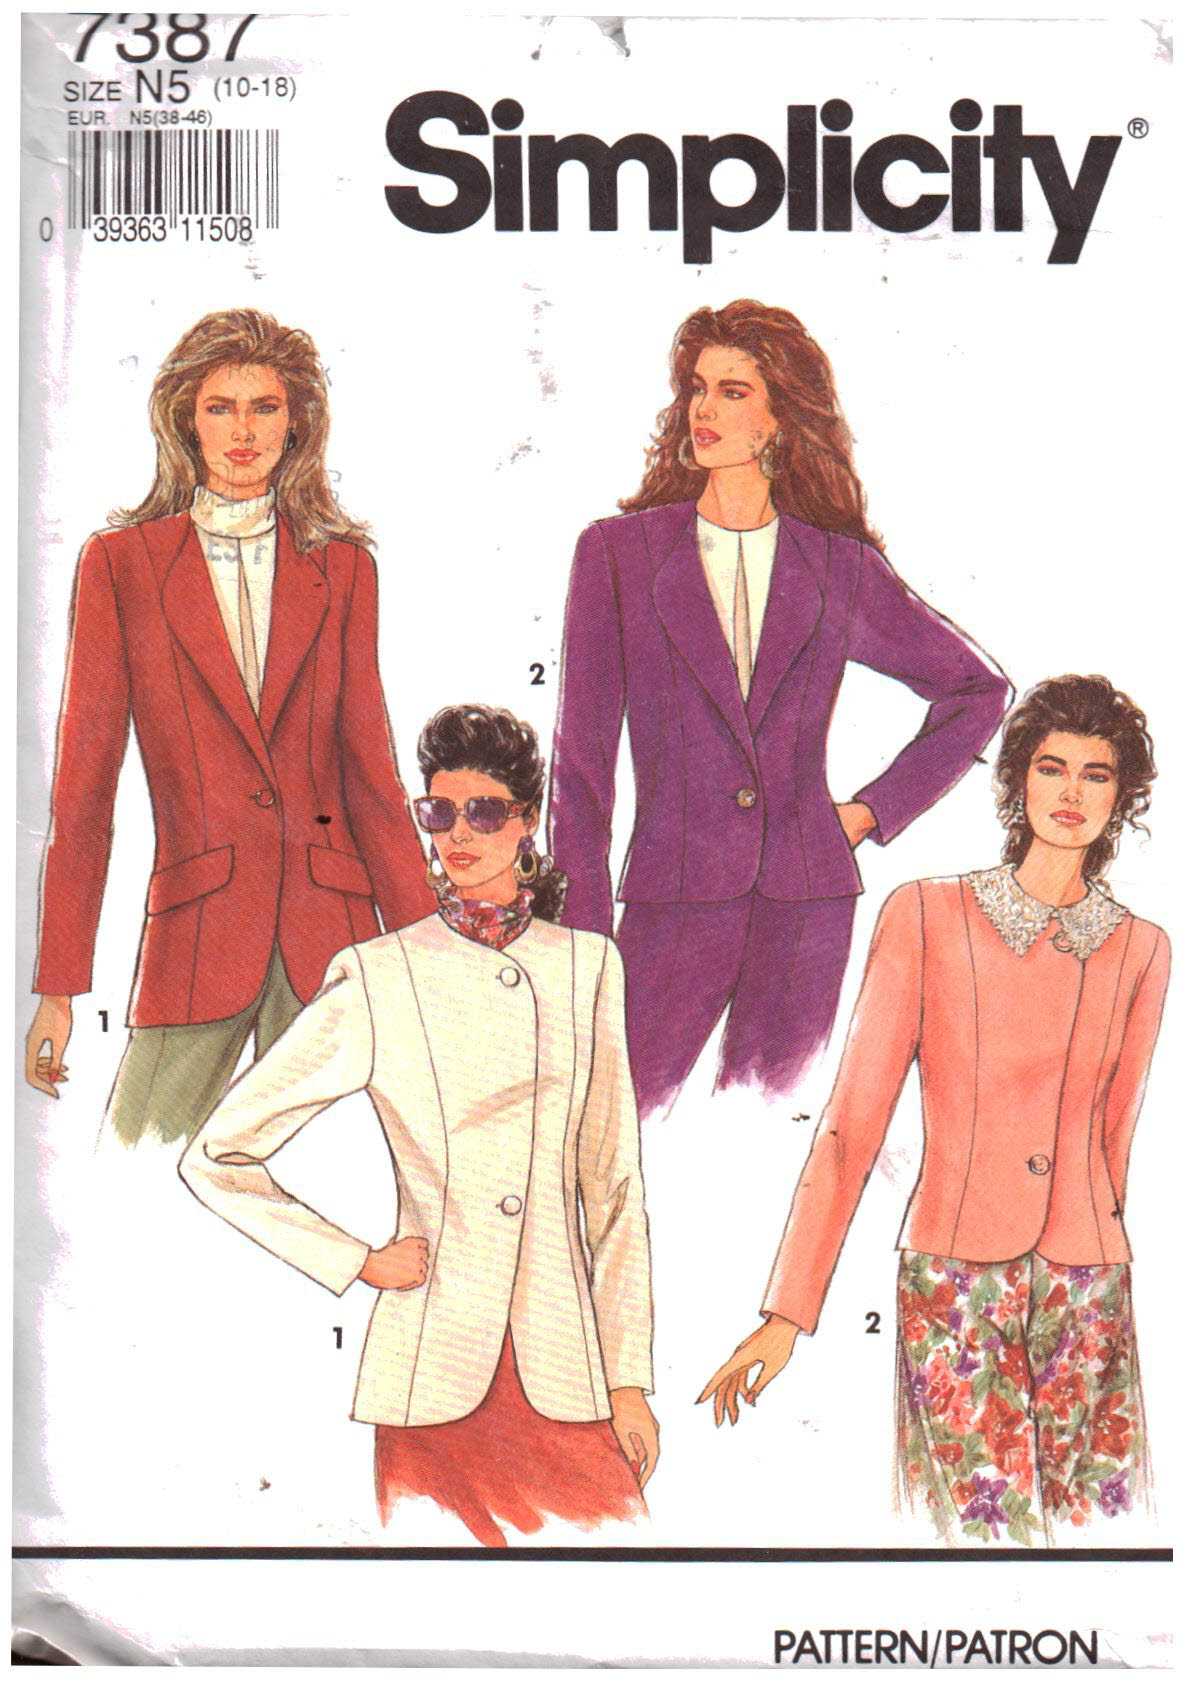 Simplicity 7387 Jacket Size: N5 10-18 Used Sewing Pattern